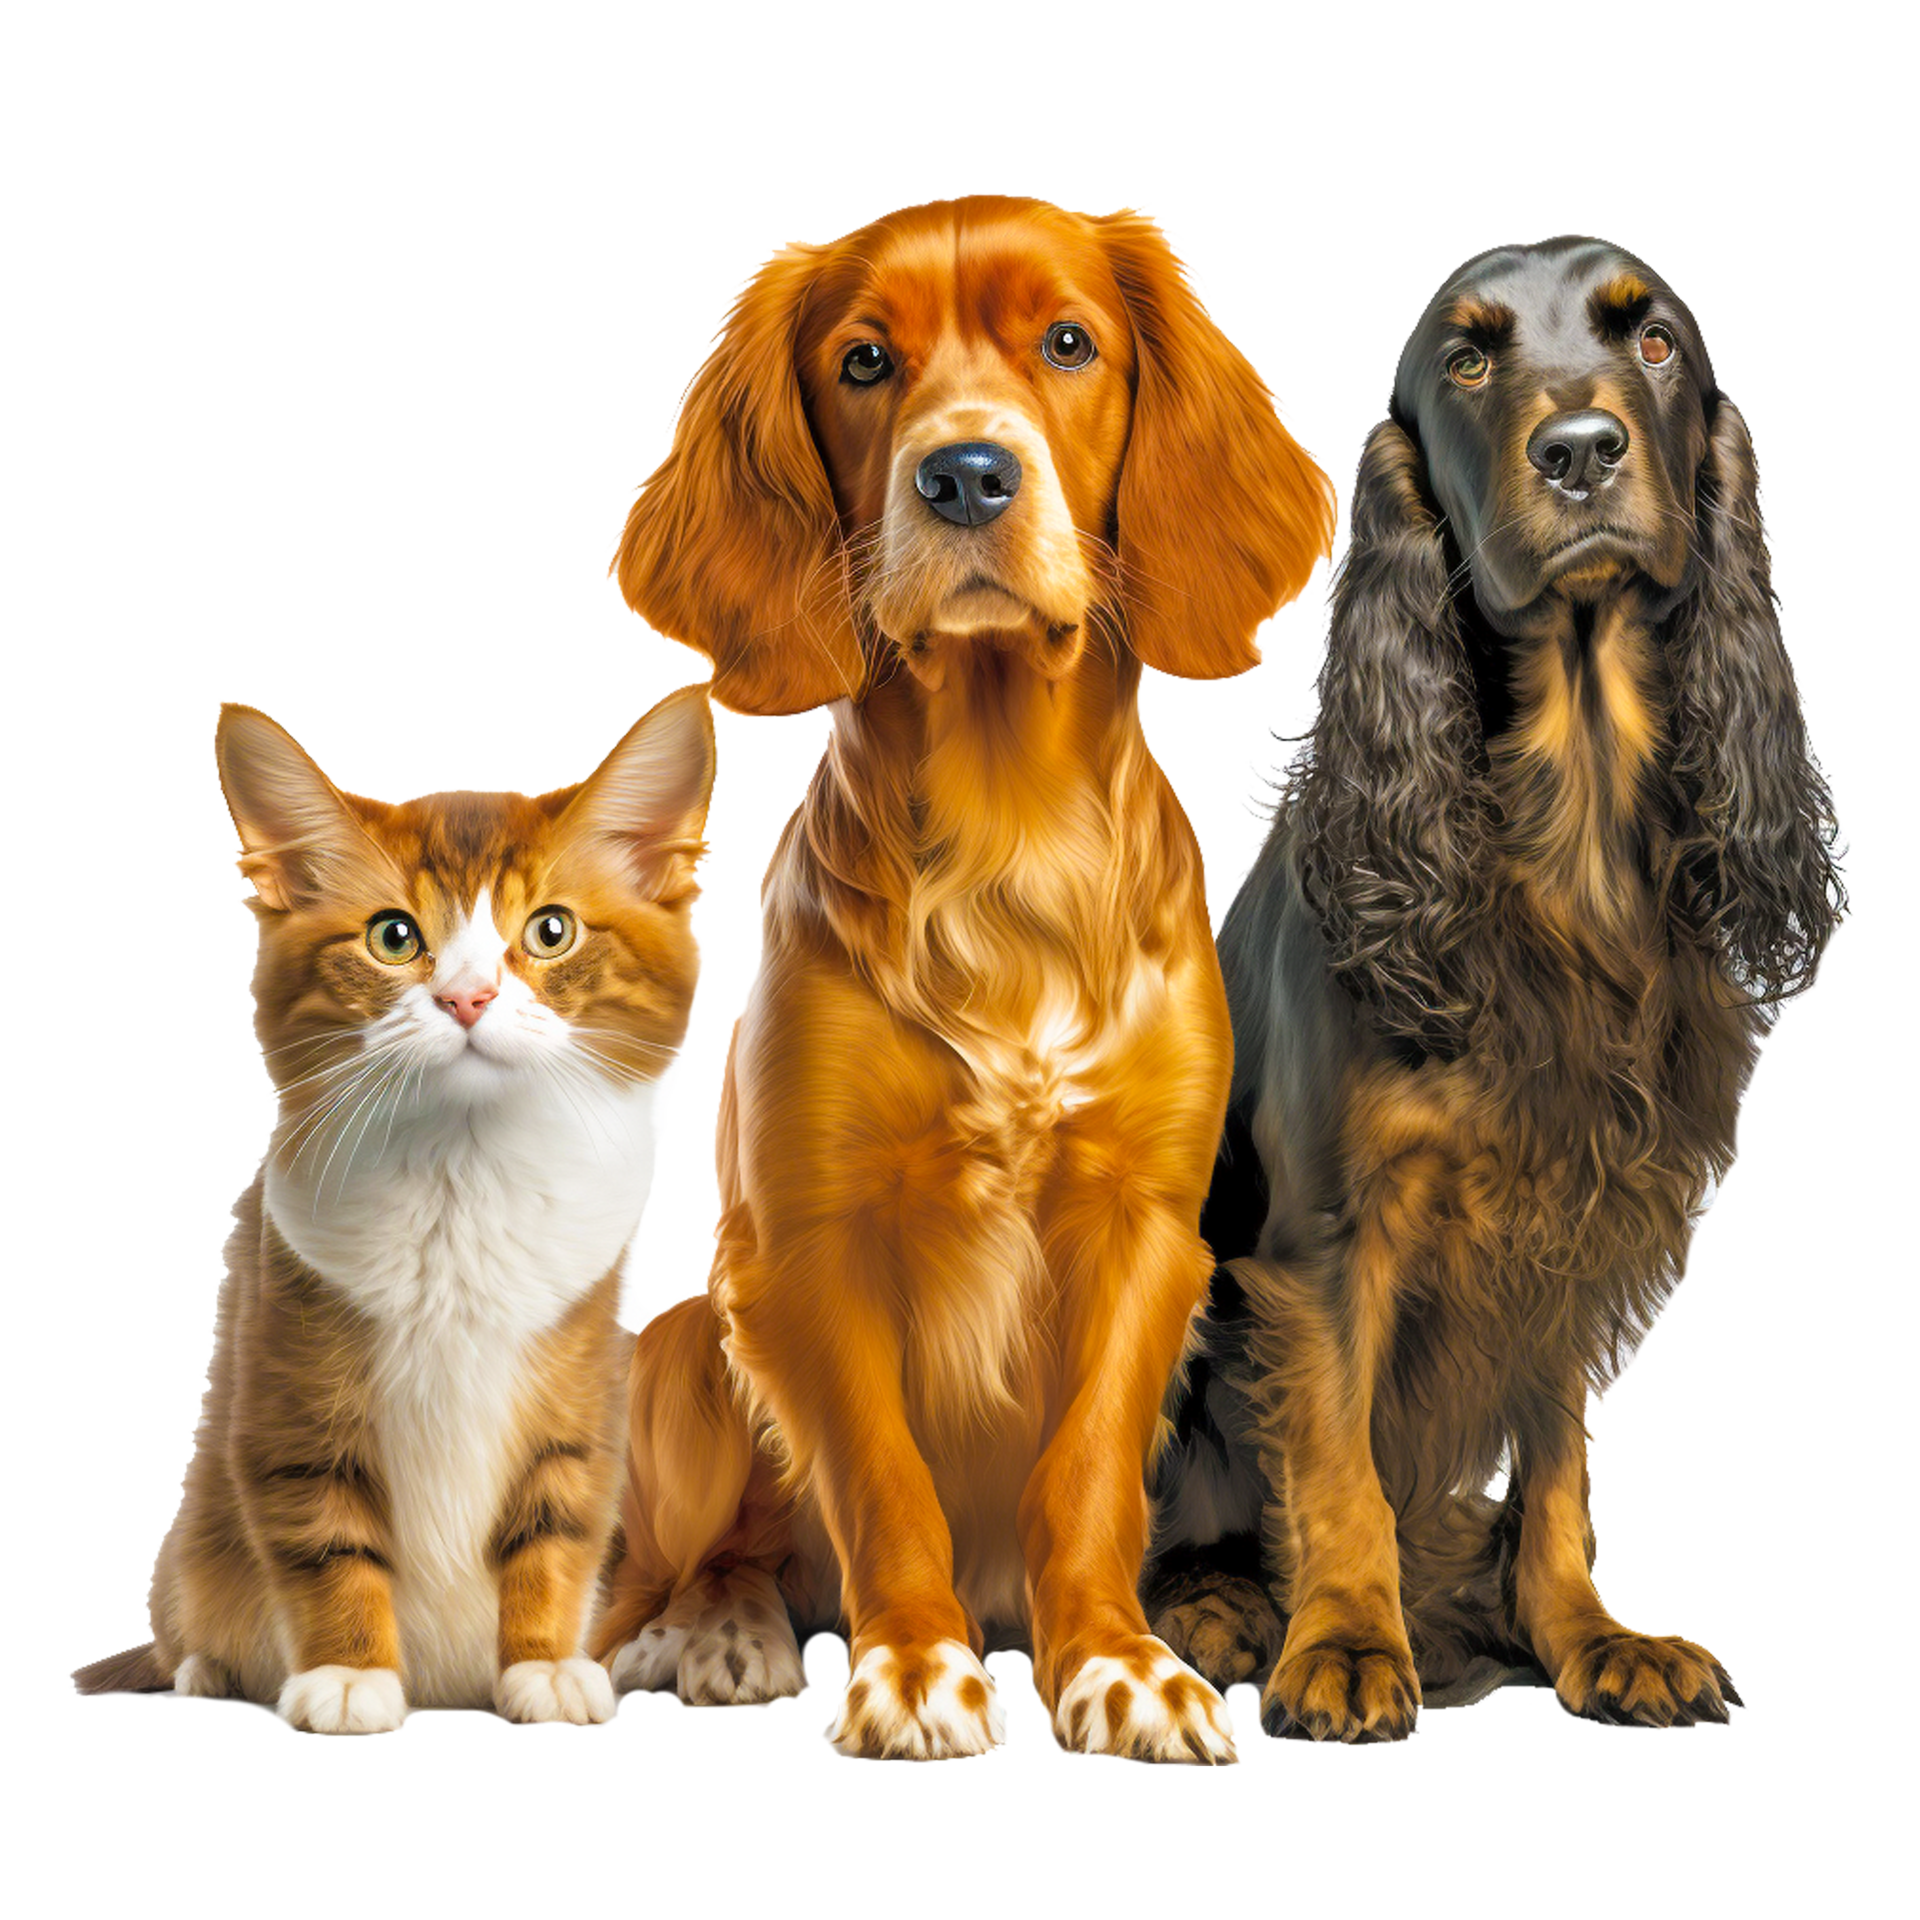 Dog And Cats PNG Image, Cartoon Dog Cat Material Red Dogs, Dog